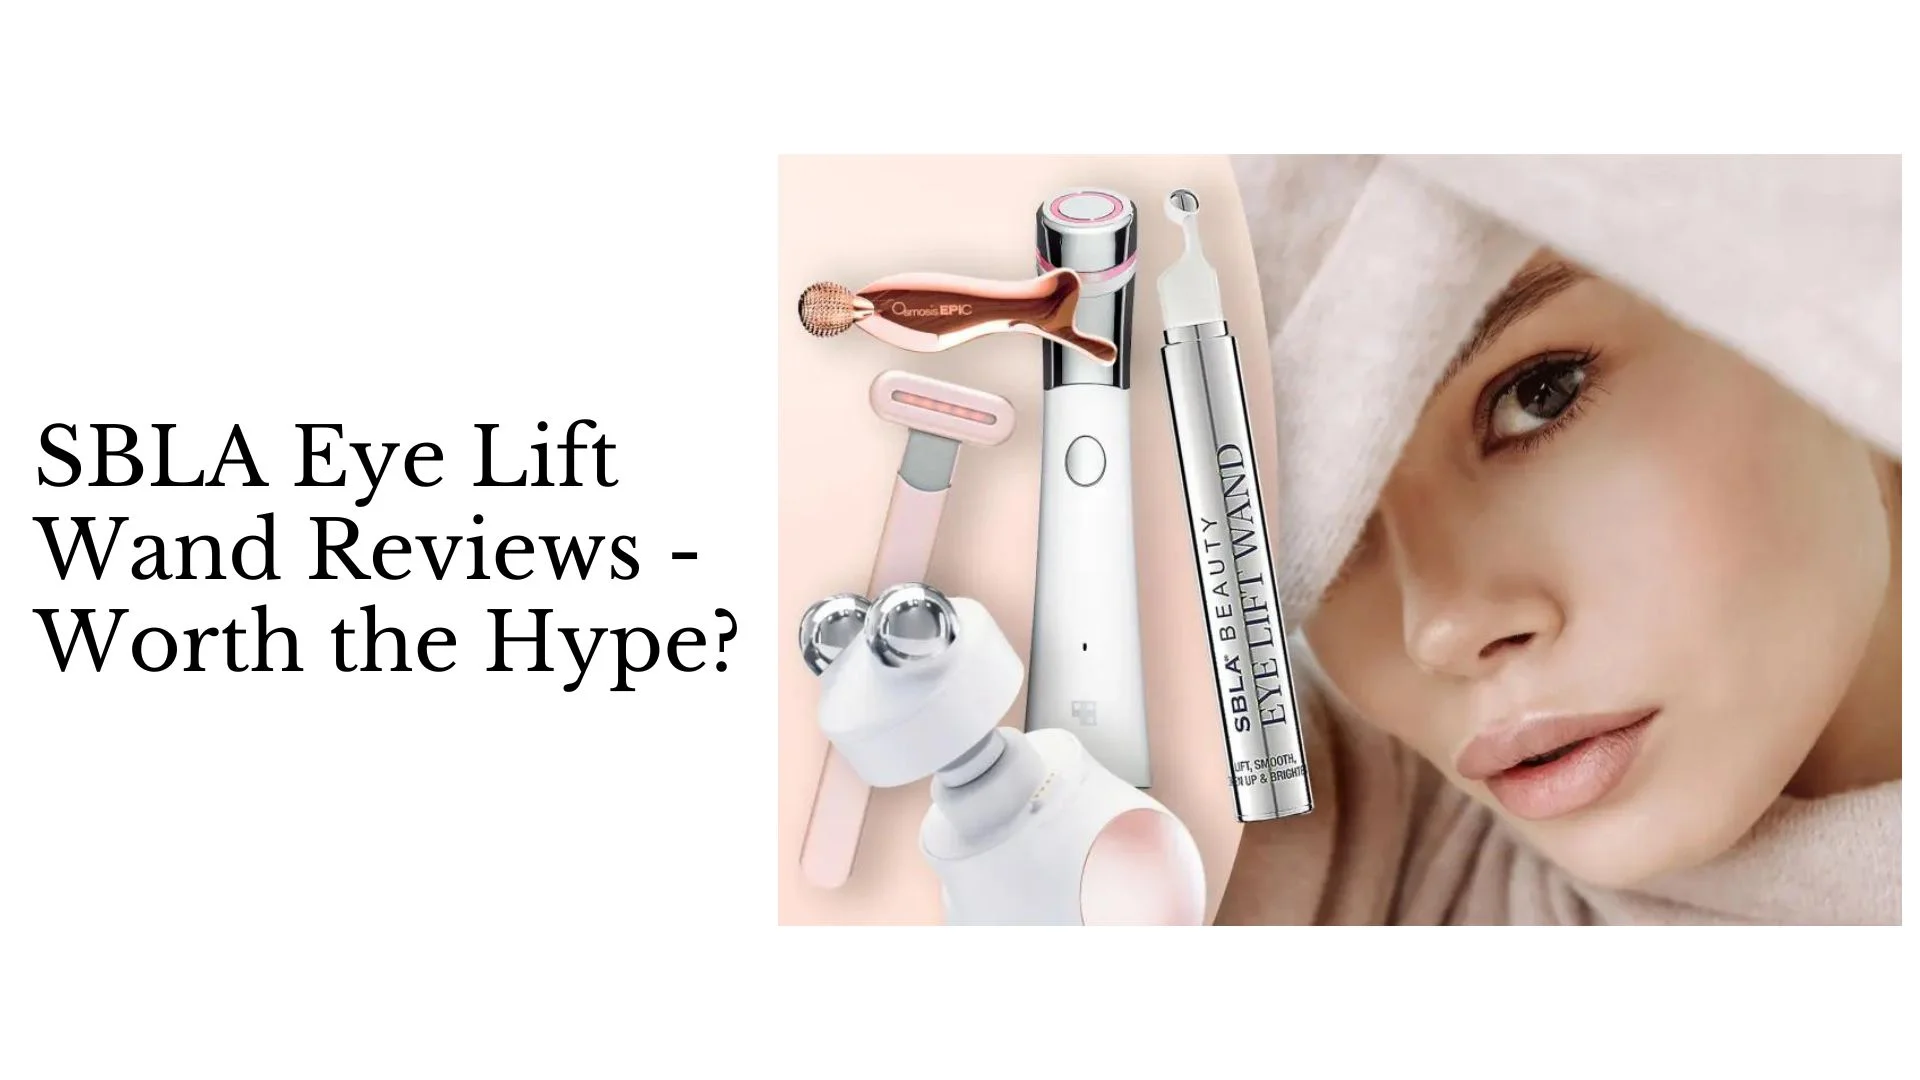 SBLA Eye Lift Wand Reviews Is It Worth the Hype